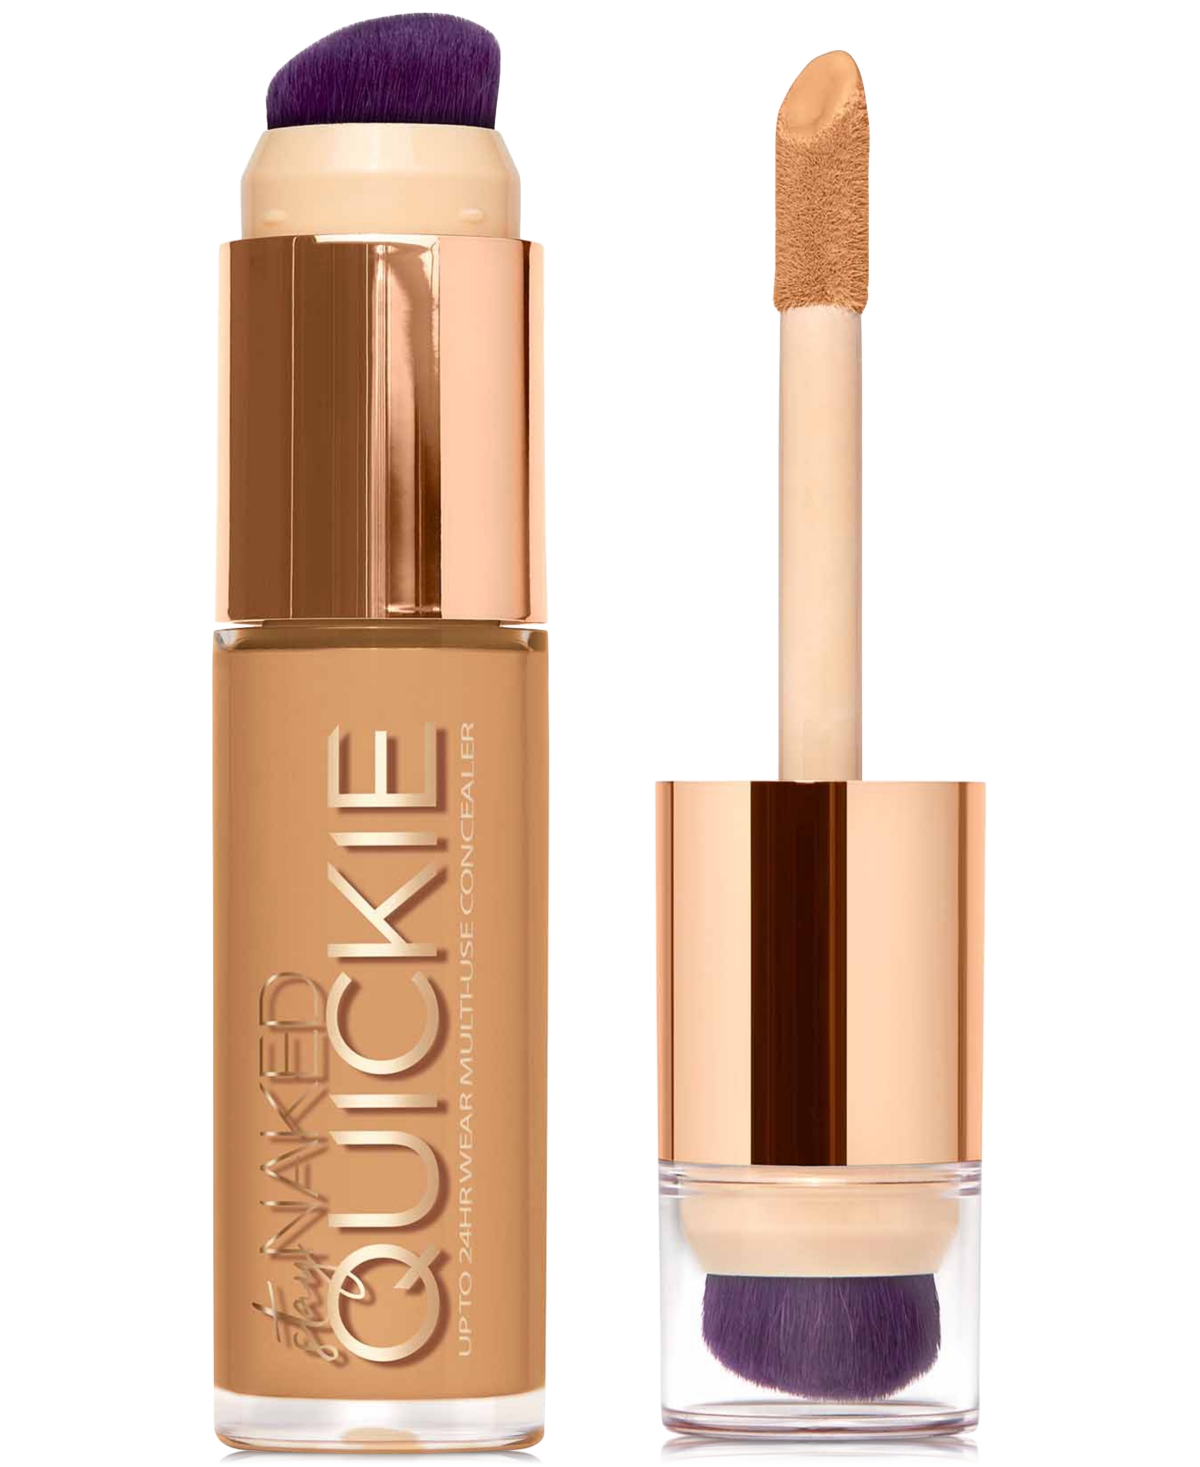 Quickie 24H Multi-Use Hydrating Full Coverage Concealer, 0.55 oz. - NN (ultra deep neutral)